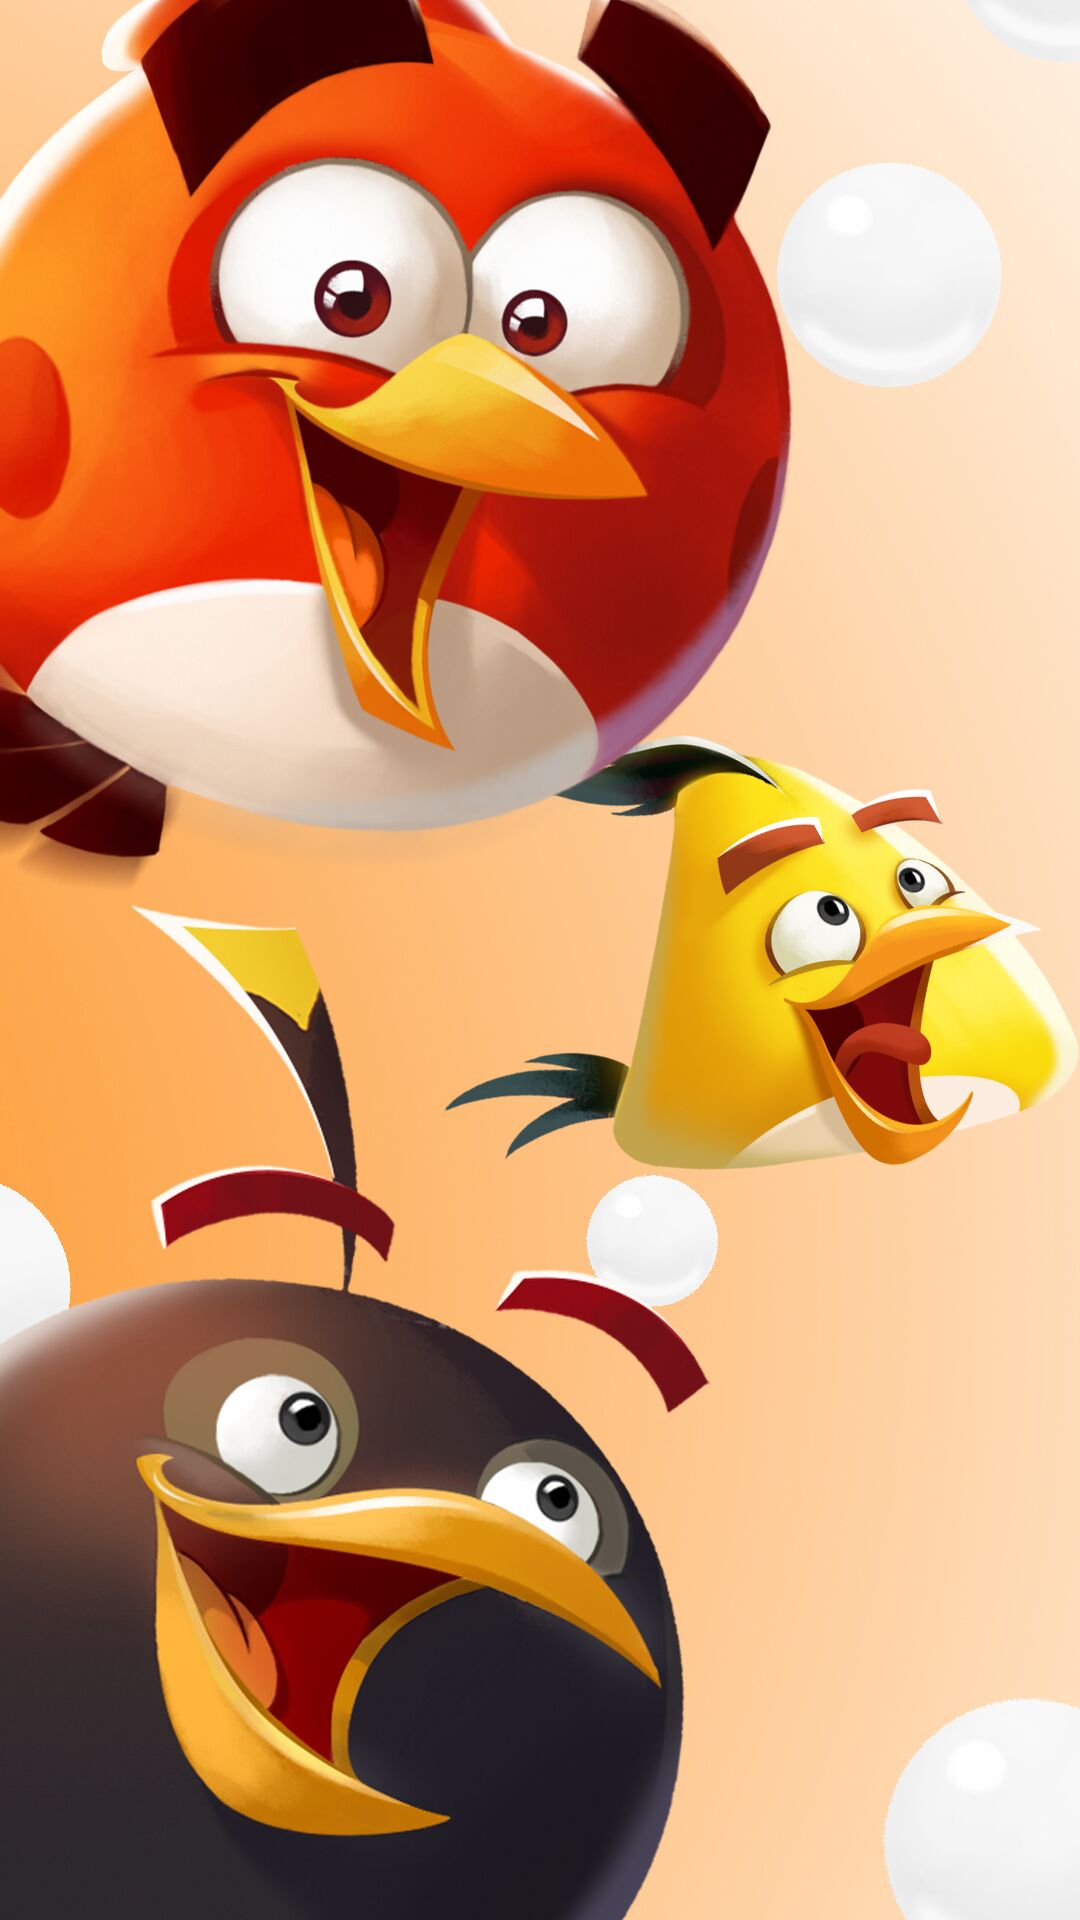 Angry Birds winter phone wallpaper for holidays